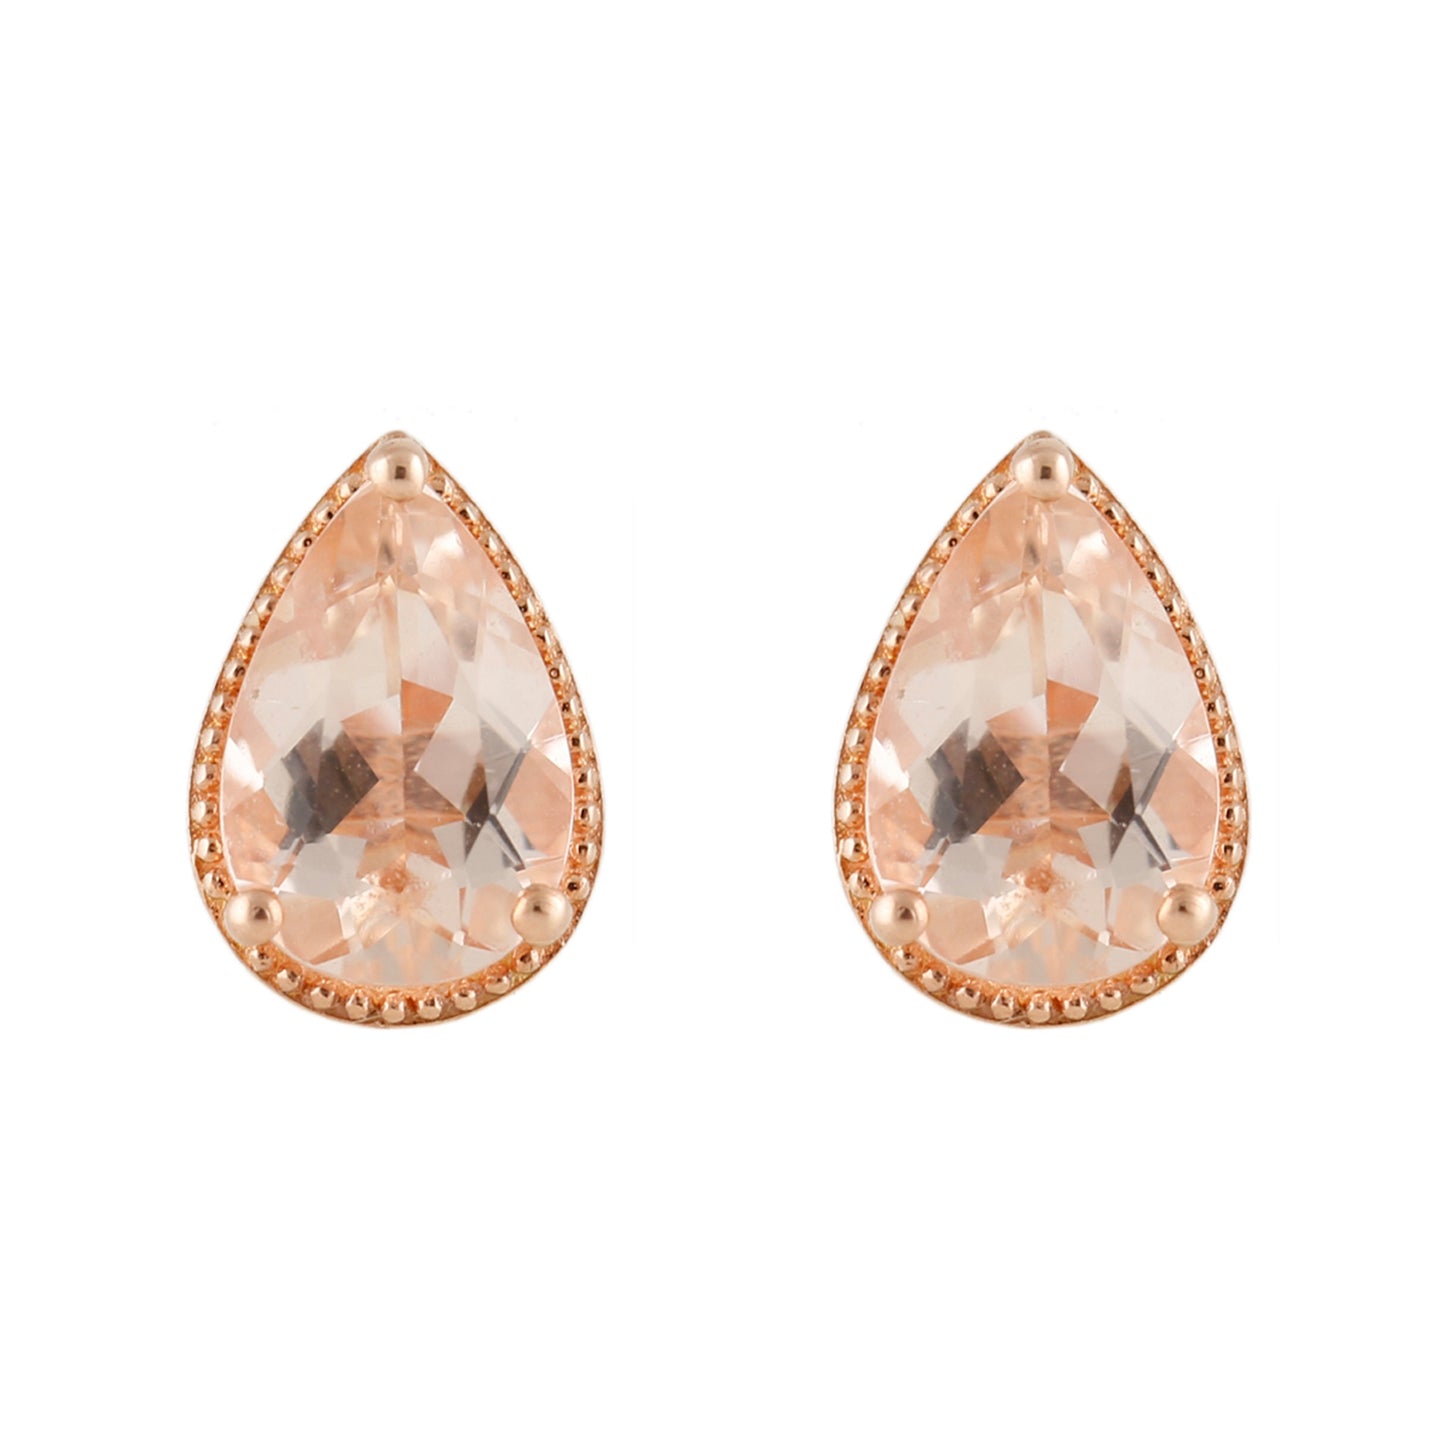 Pinctore 14K Rose Gold Over Sterling Silver 2.2ctw Morganite Pear Shaped Earrings